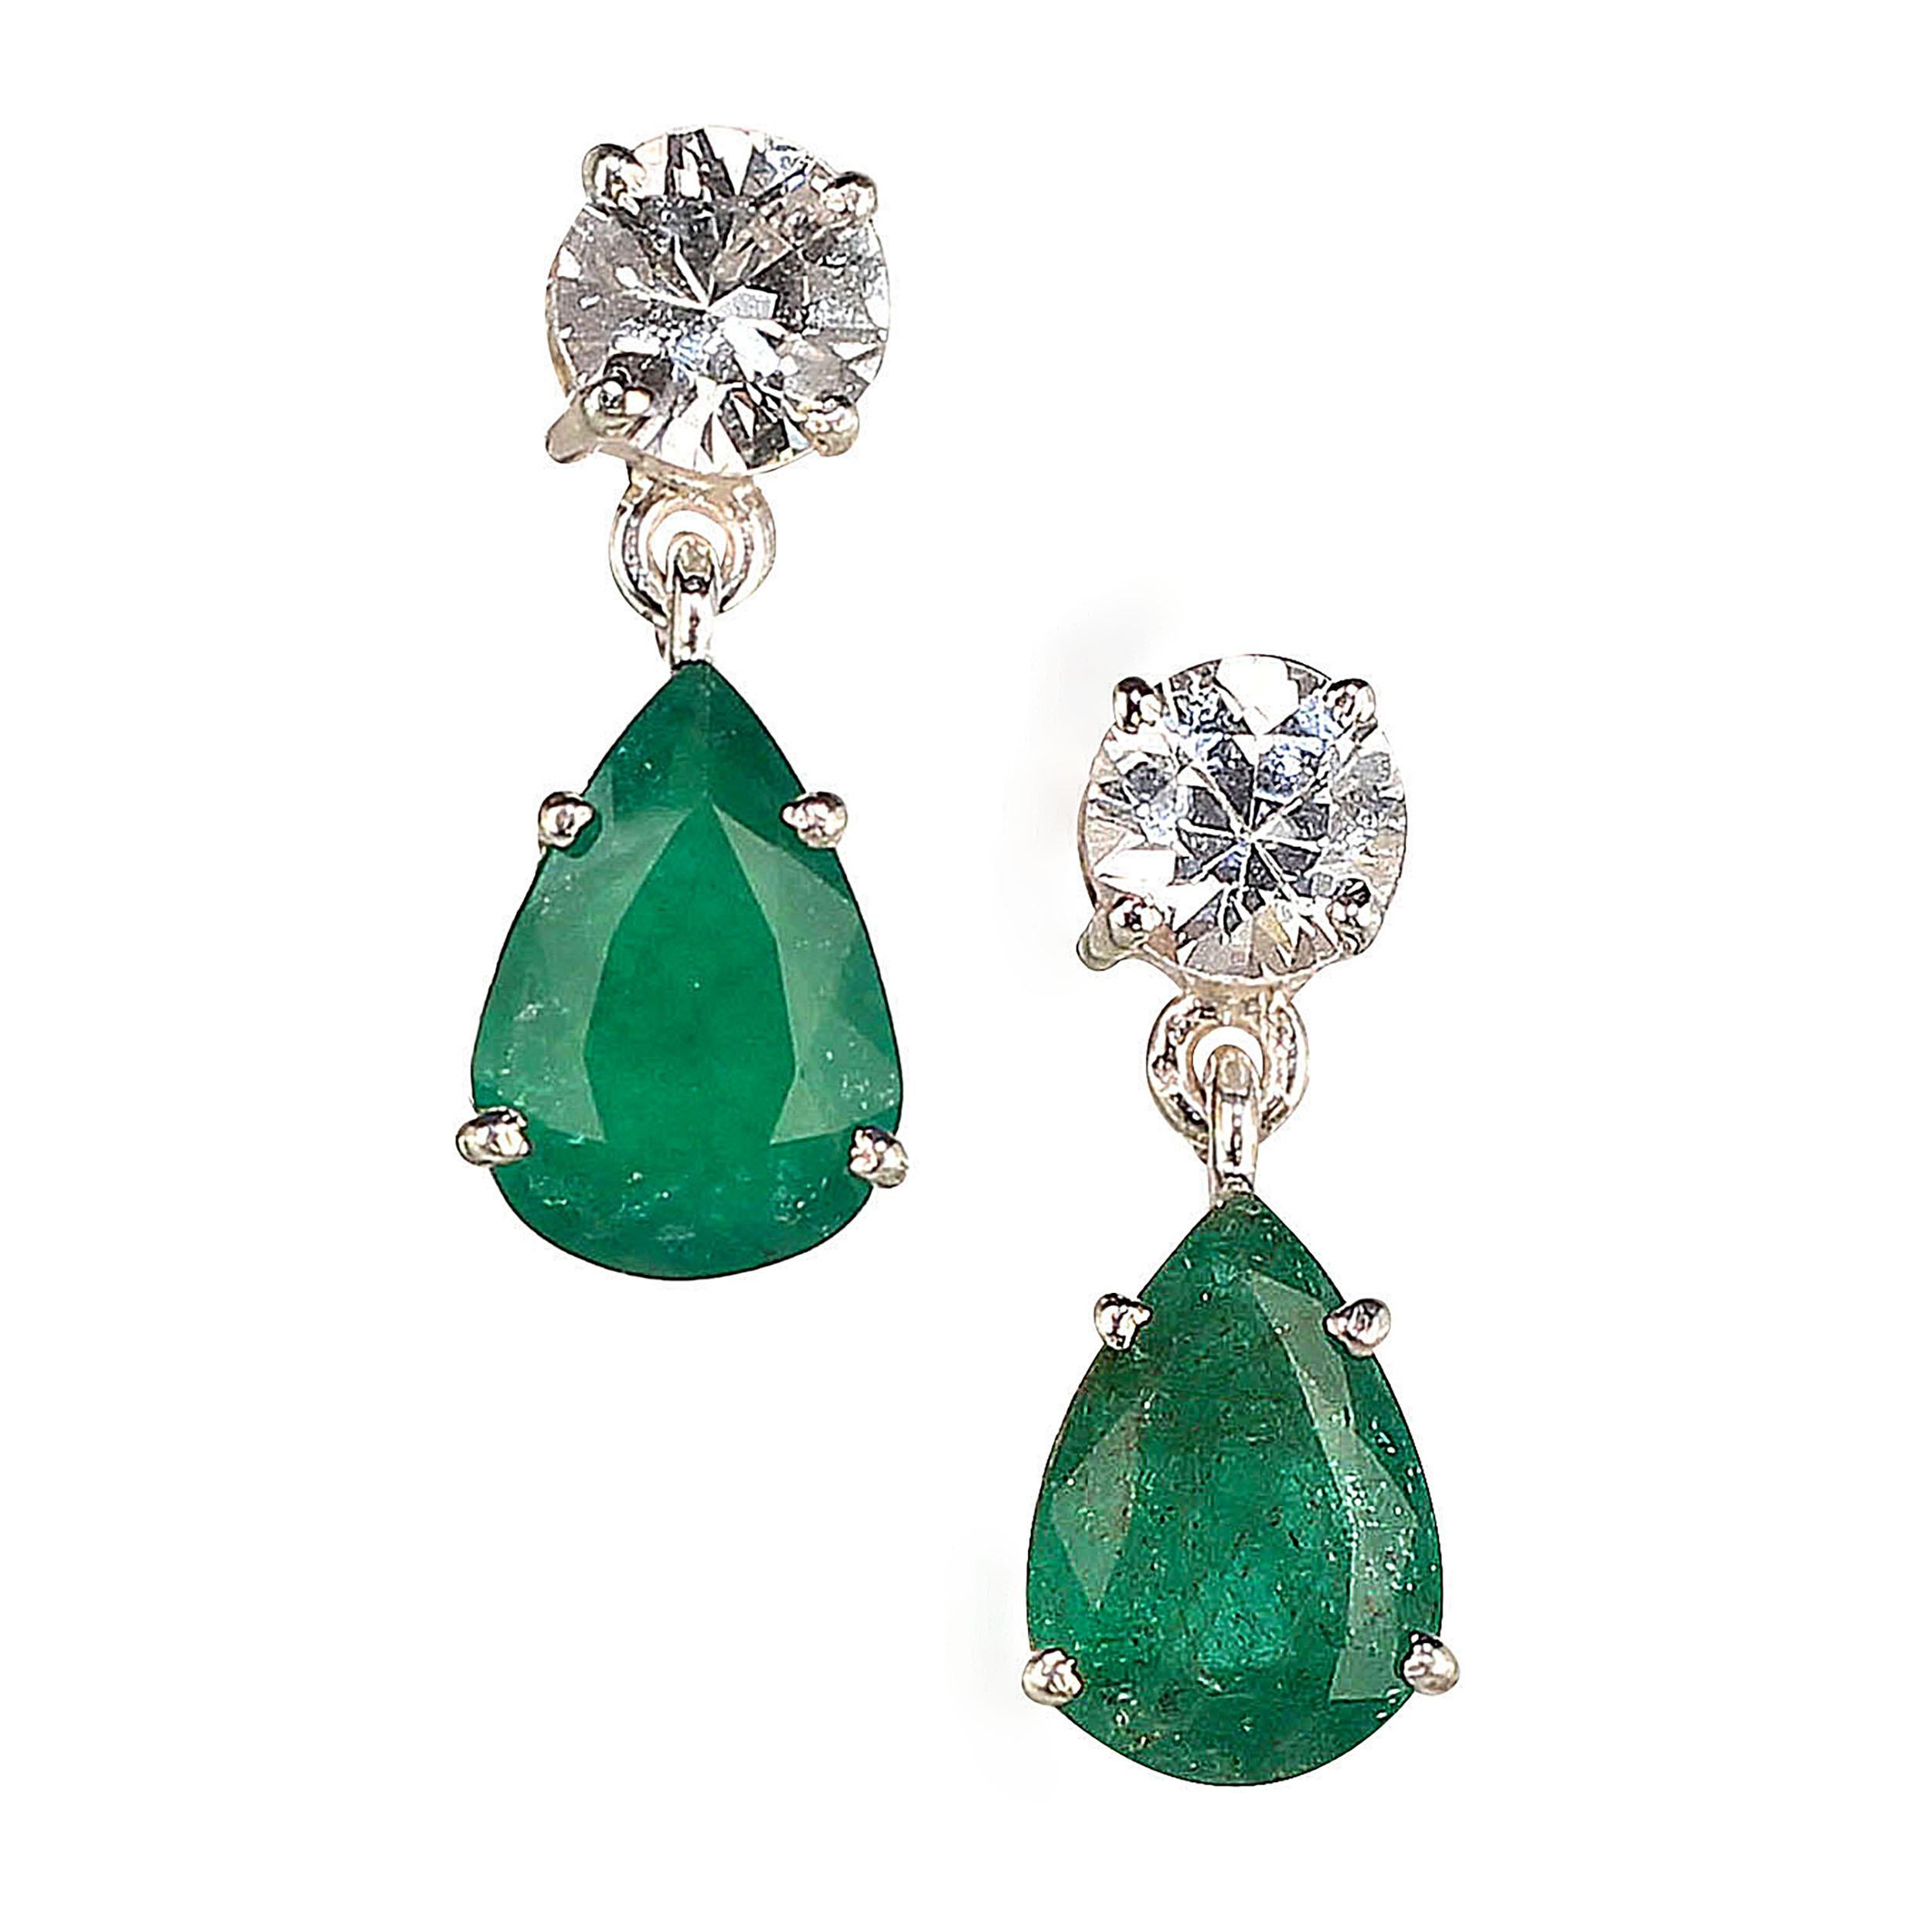 Lovely dangle Emerald and scintillating real Zircon earrings.  These gorgeous pear shape Emeralds come straight from Belo Horizonte, the capital of Minas Gerais, in central Brazil.  One of our favorite suppliers is our first stop in Belo because